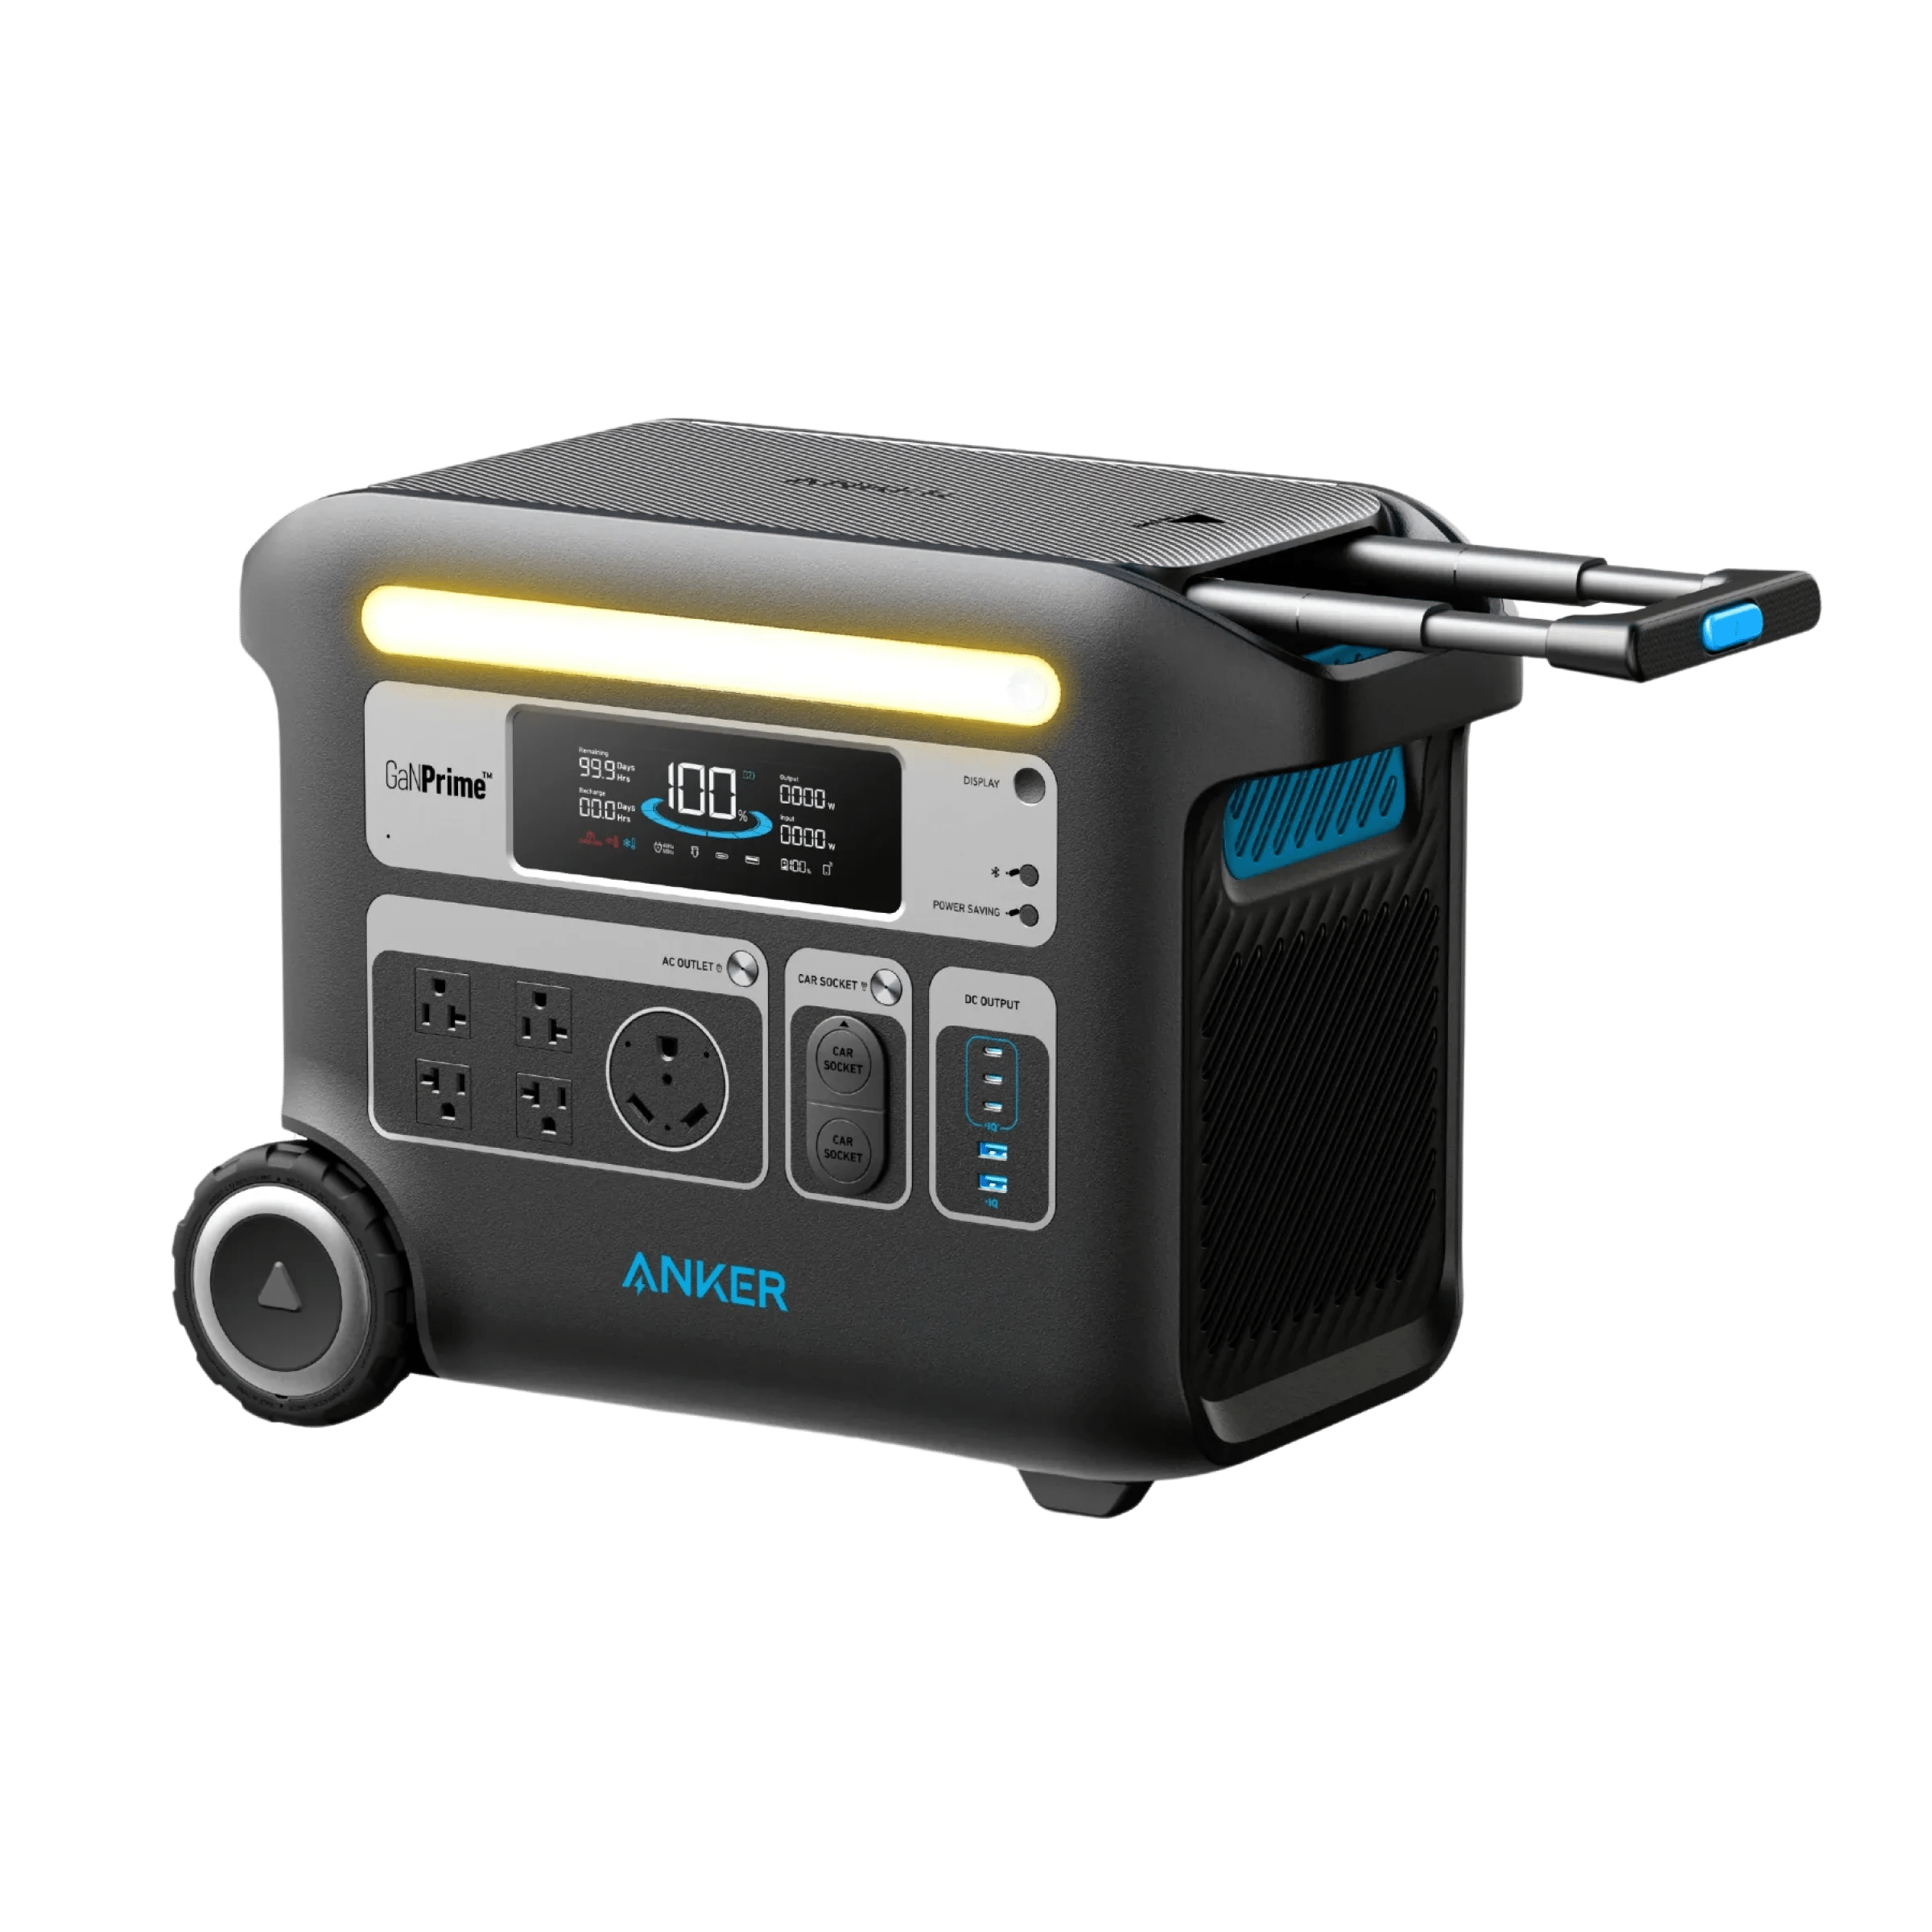 Anker SOLIX F2000 Solar Generator (Solar Generator 767 with 3x 200W Solar Panel and Expansion Battery)